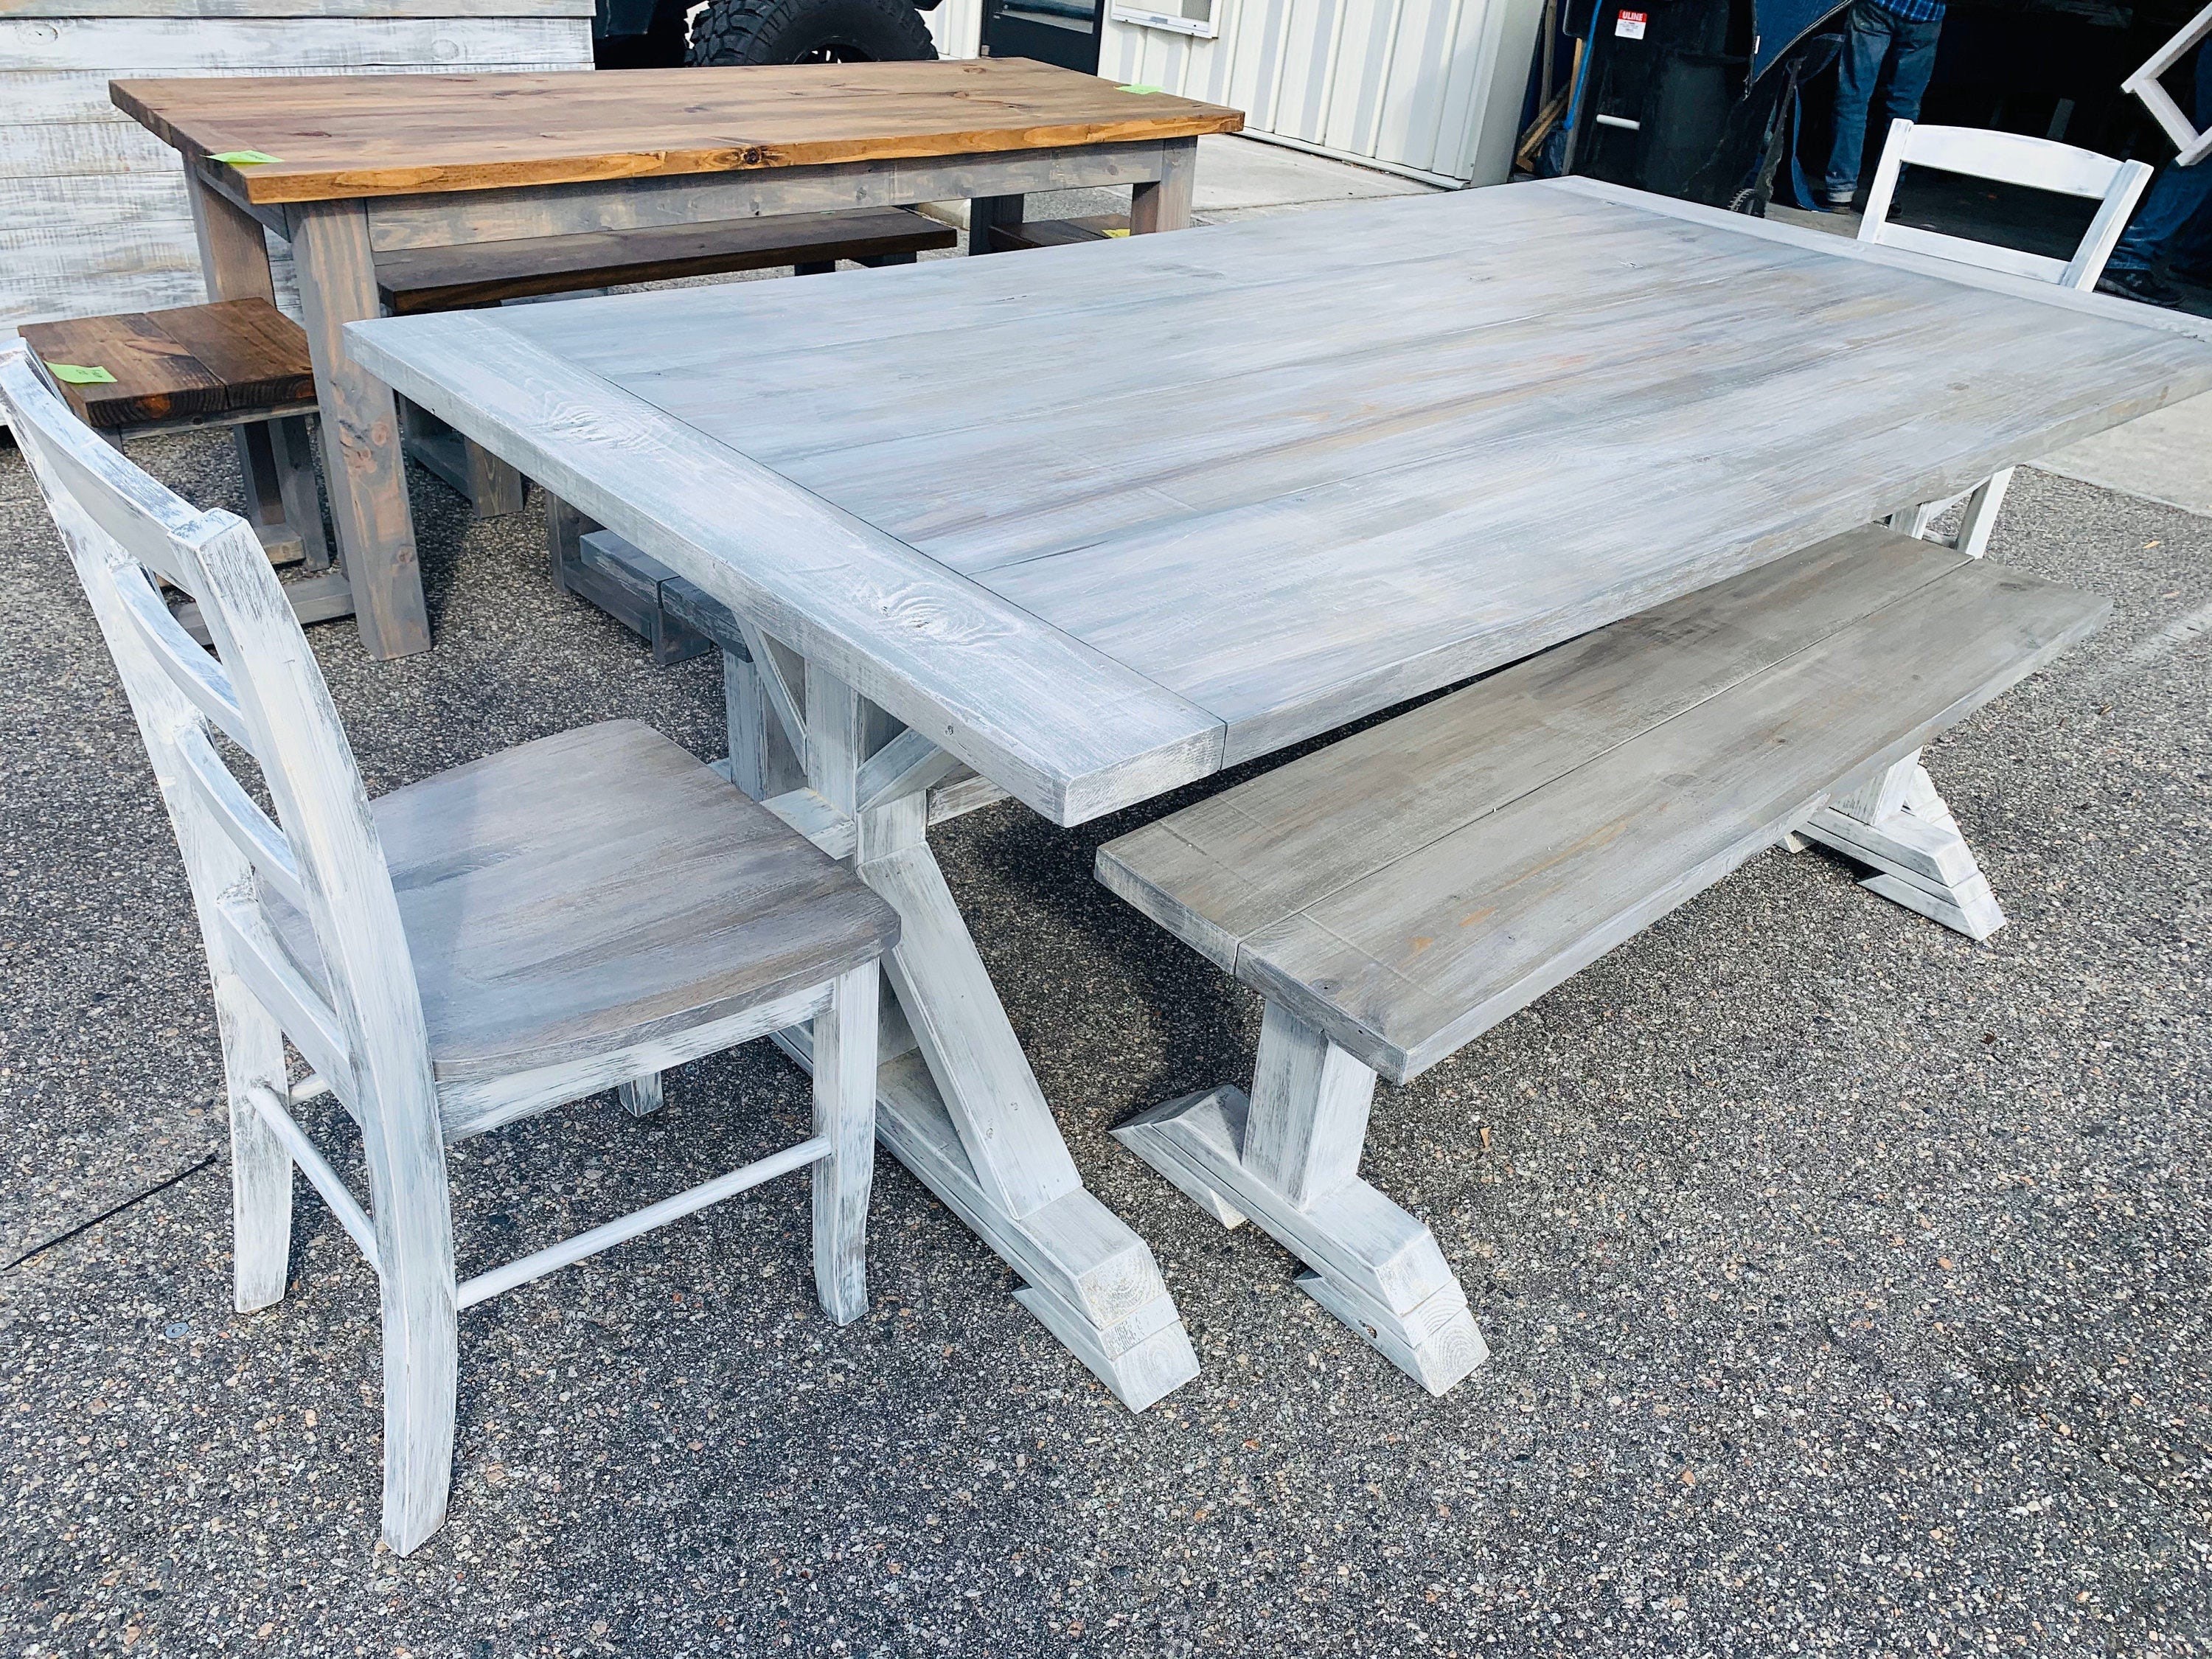 7ft rustic farmhouse table set with benches and chairs and